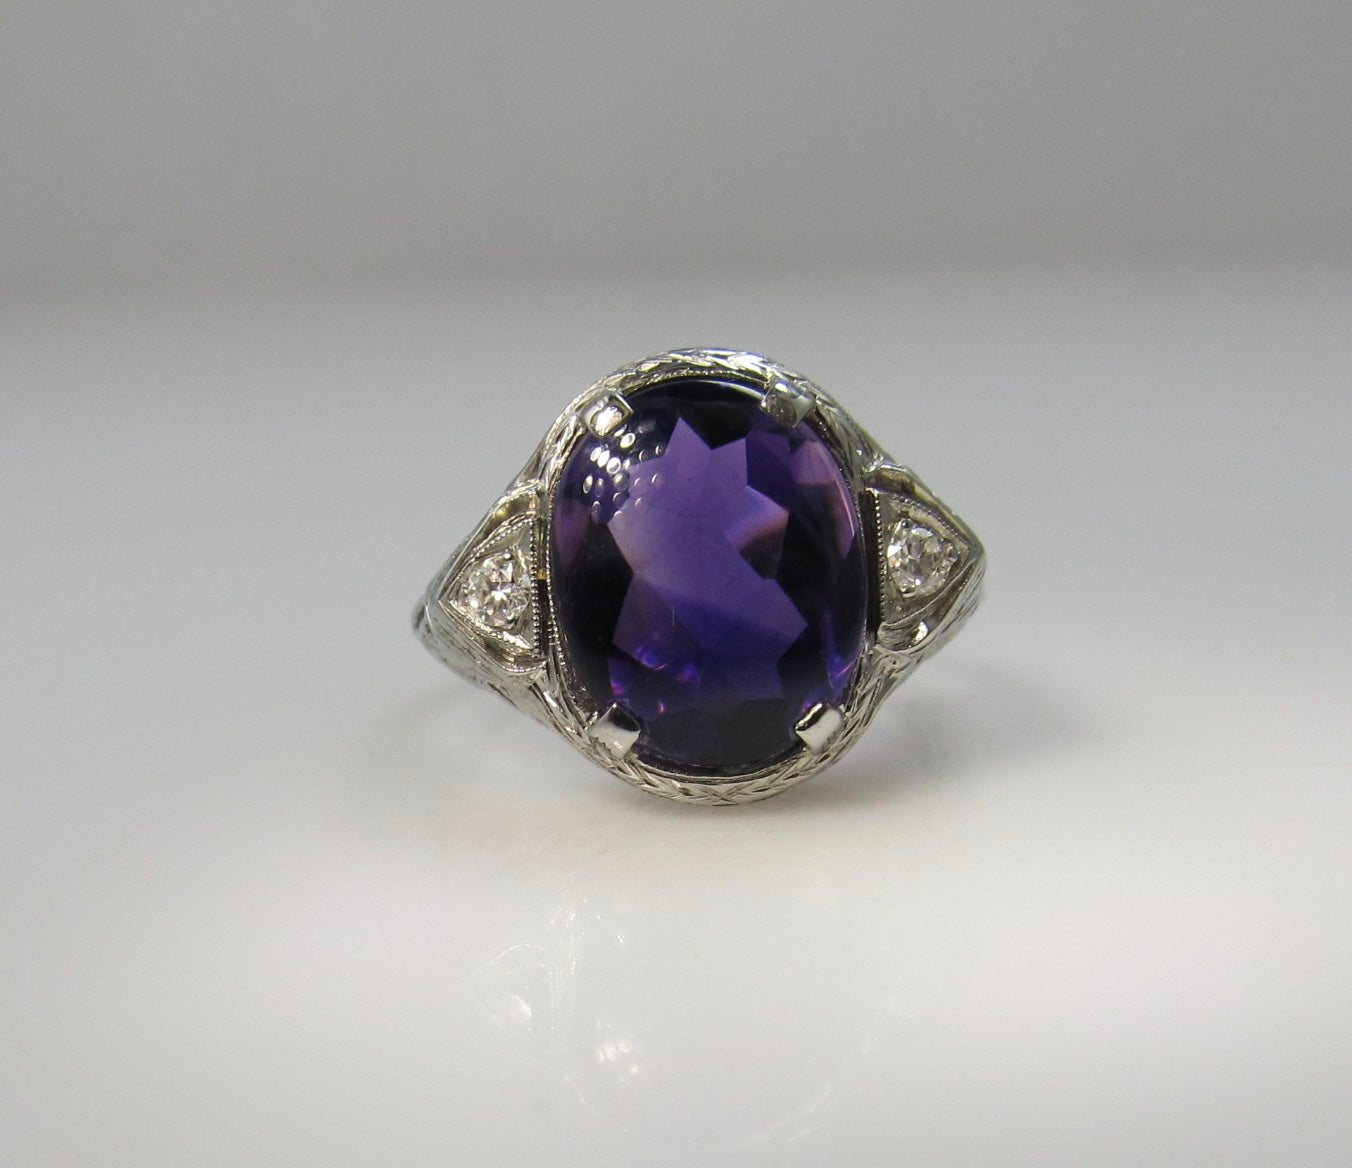 Vintage amethyst and diamond ring, 14k white gold filigree – Victorious